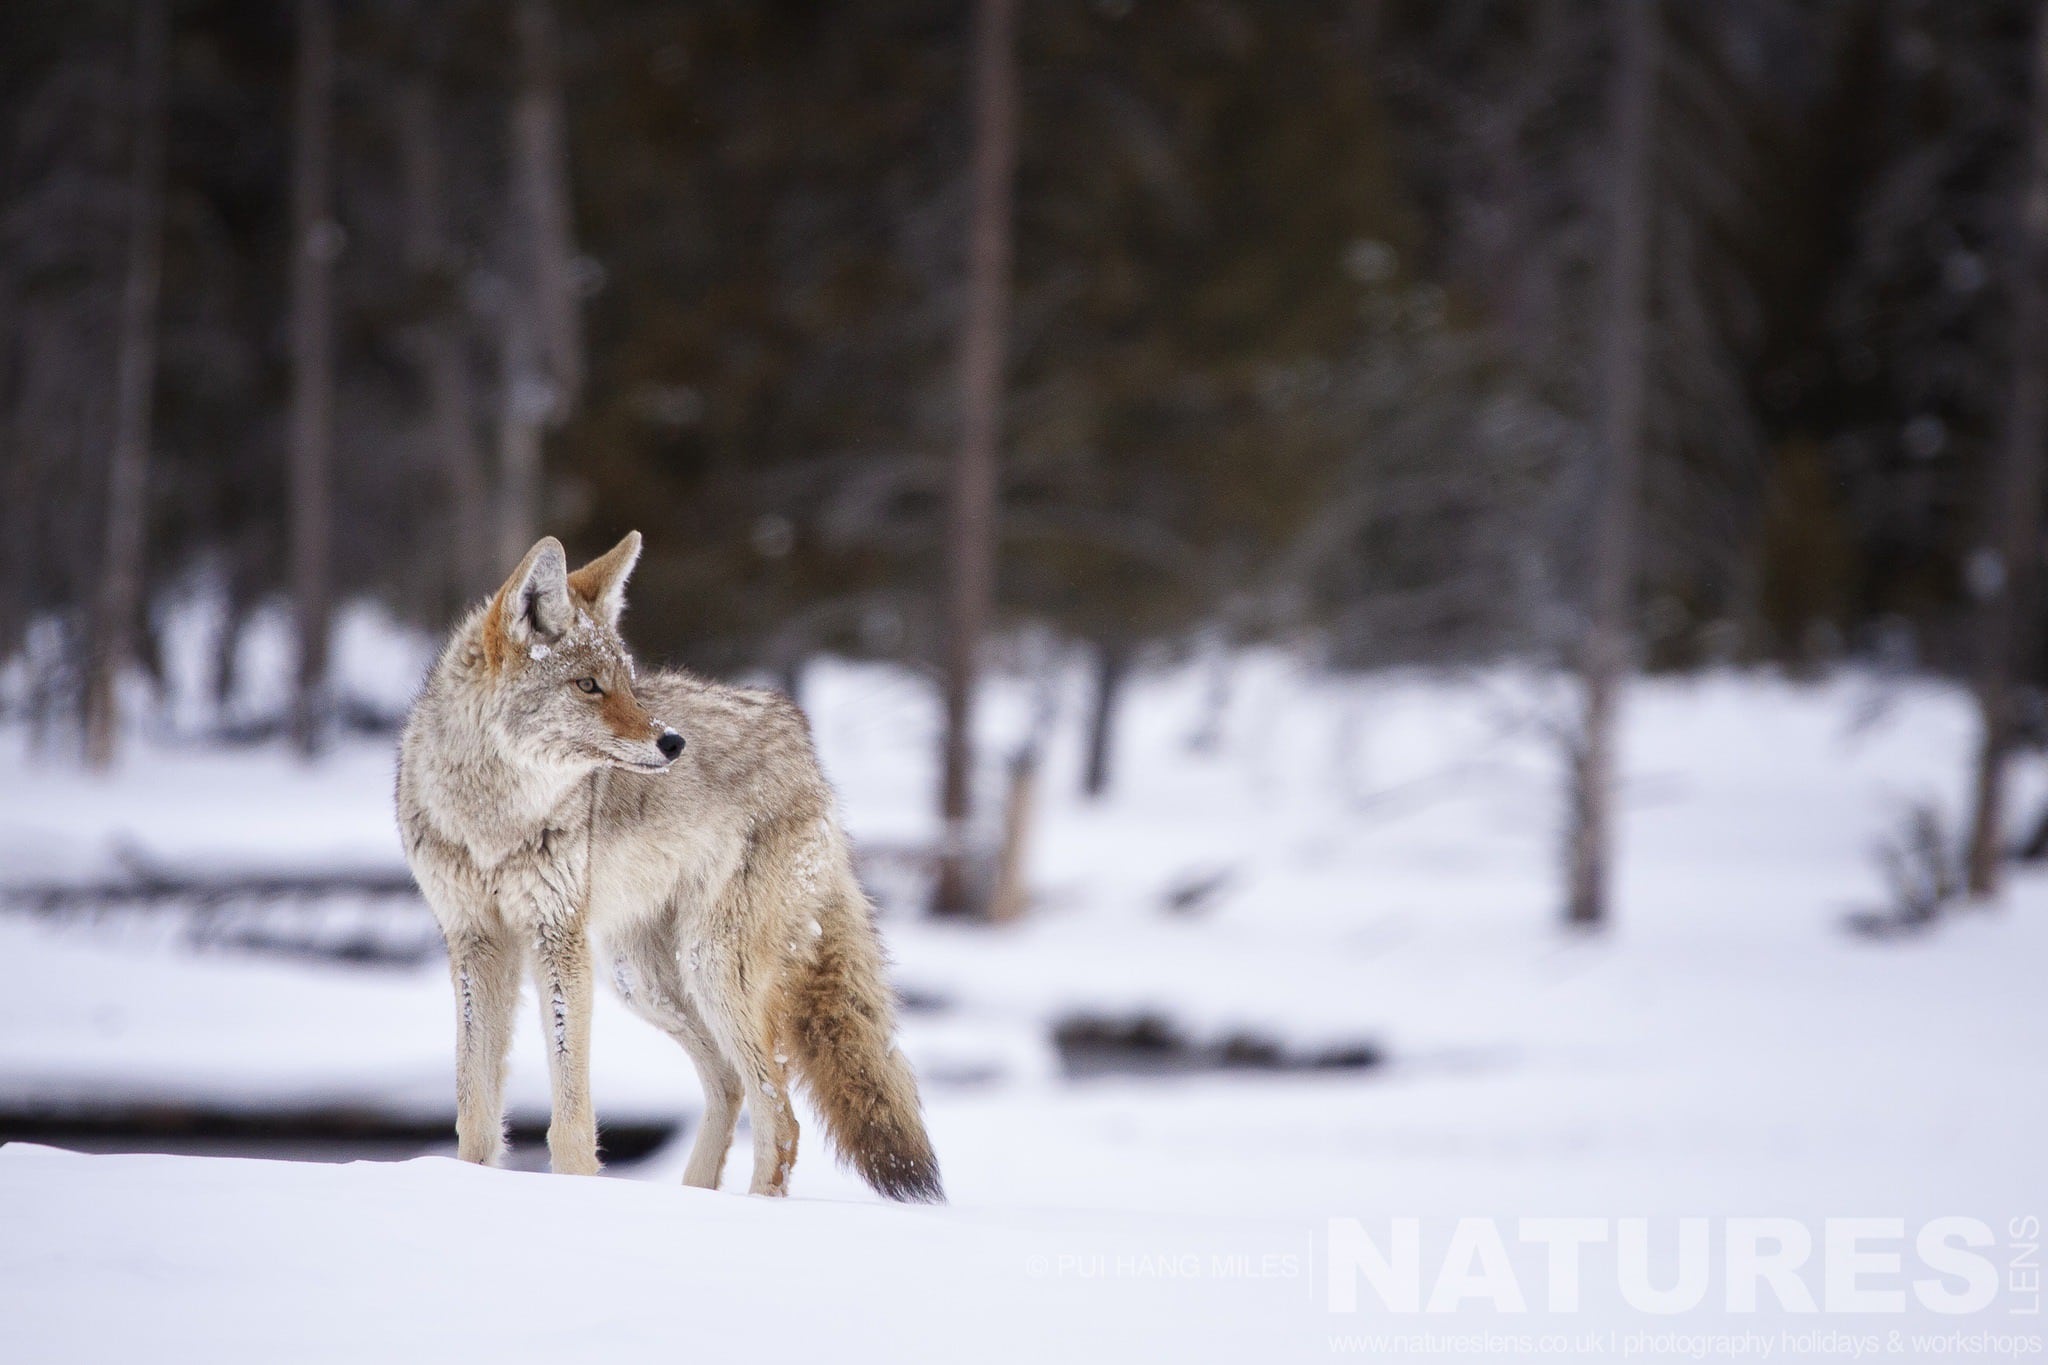 One Of Yellowstone'S Coyote'S Pauses Typical Of The Type Of Image That You Will Capture During The Wildlife Of Yellowstone In Winter Photography Holiday